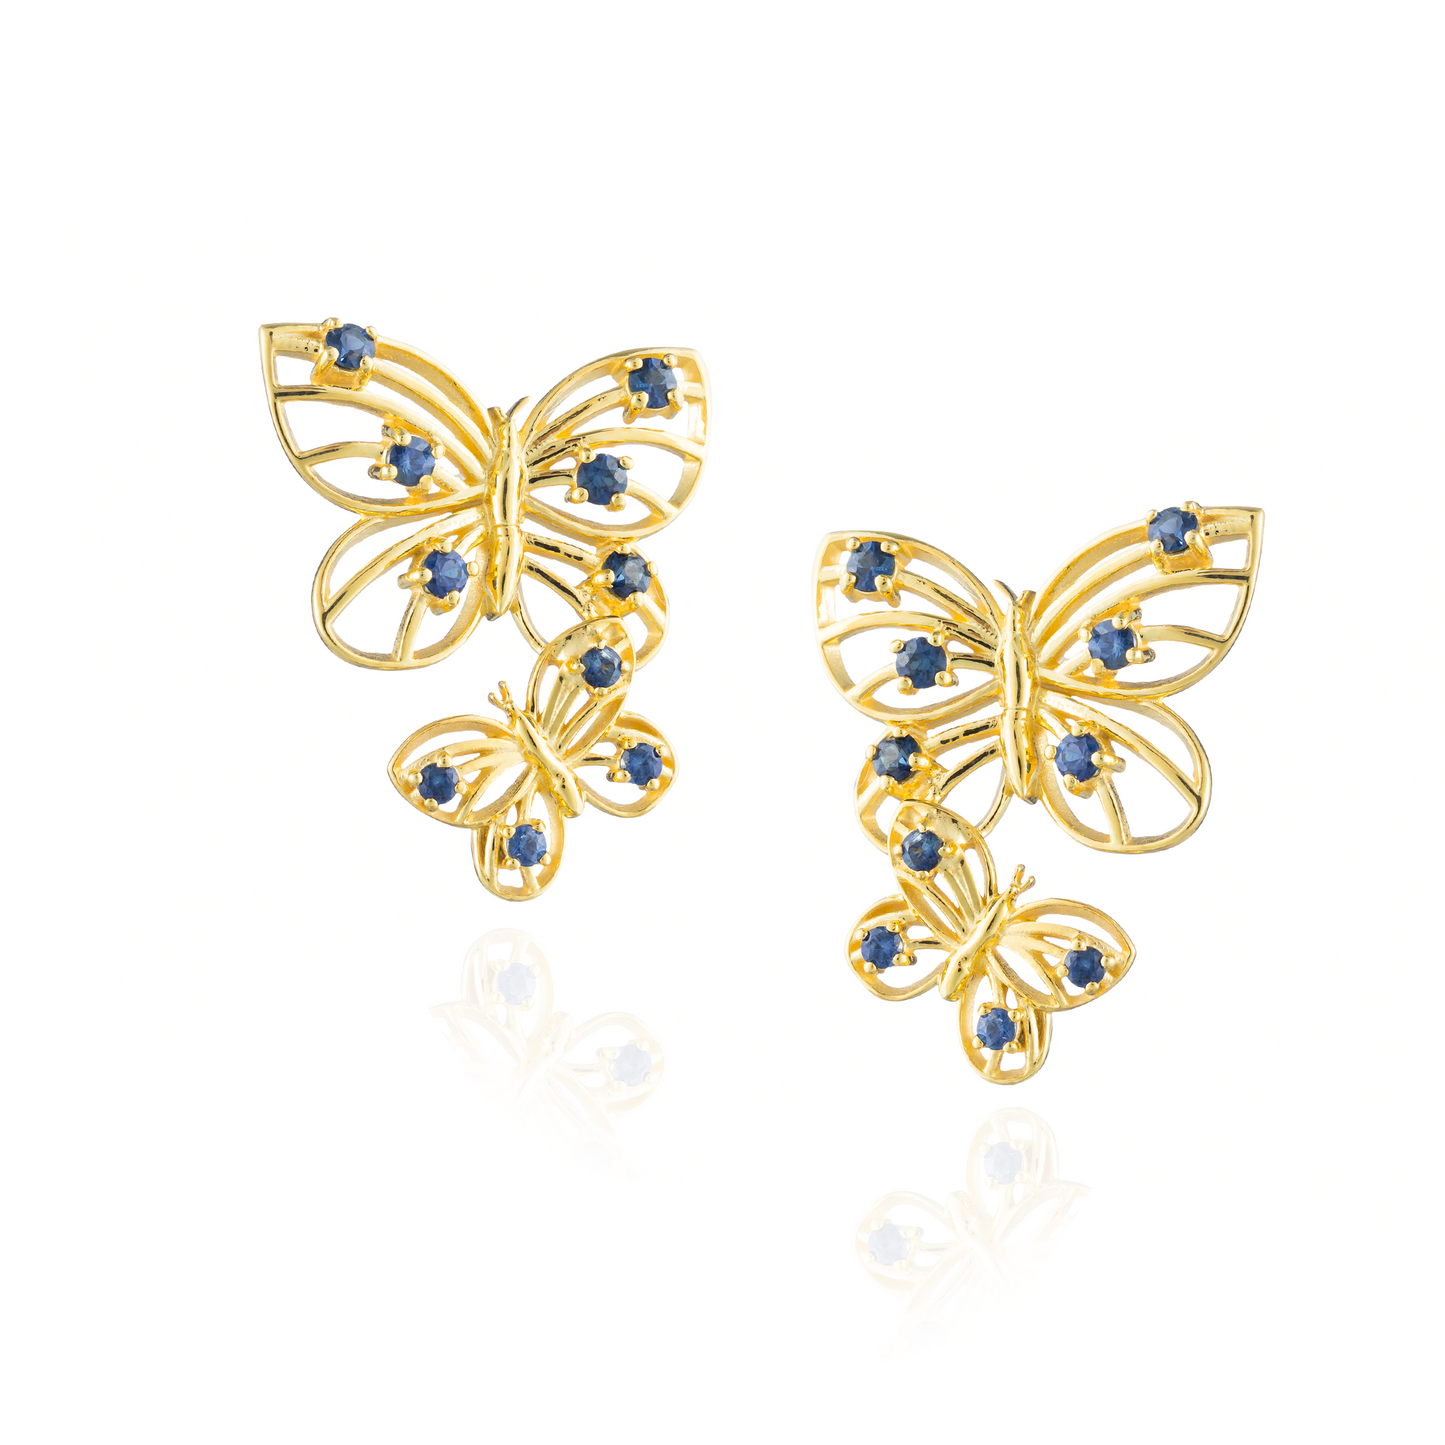 925 Silver Earrings plated in 18k Yellow Gold with Blue Sapphire